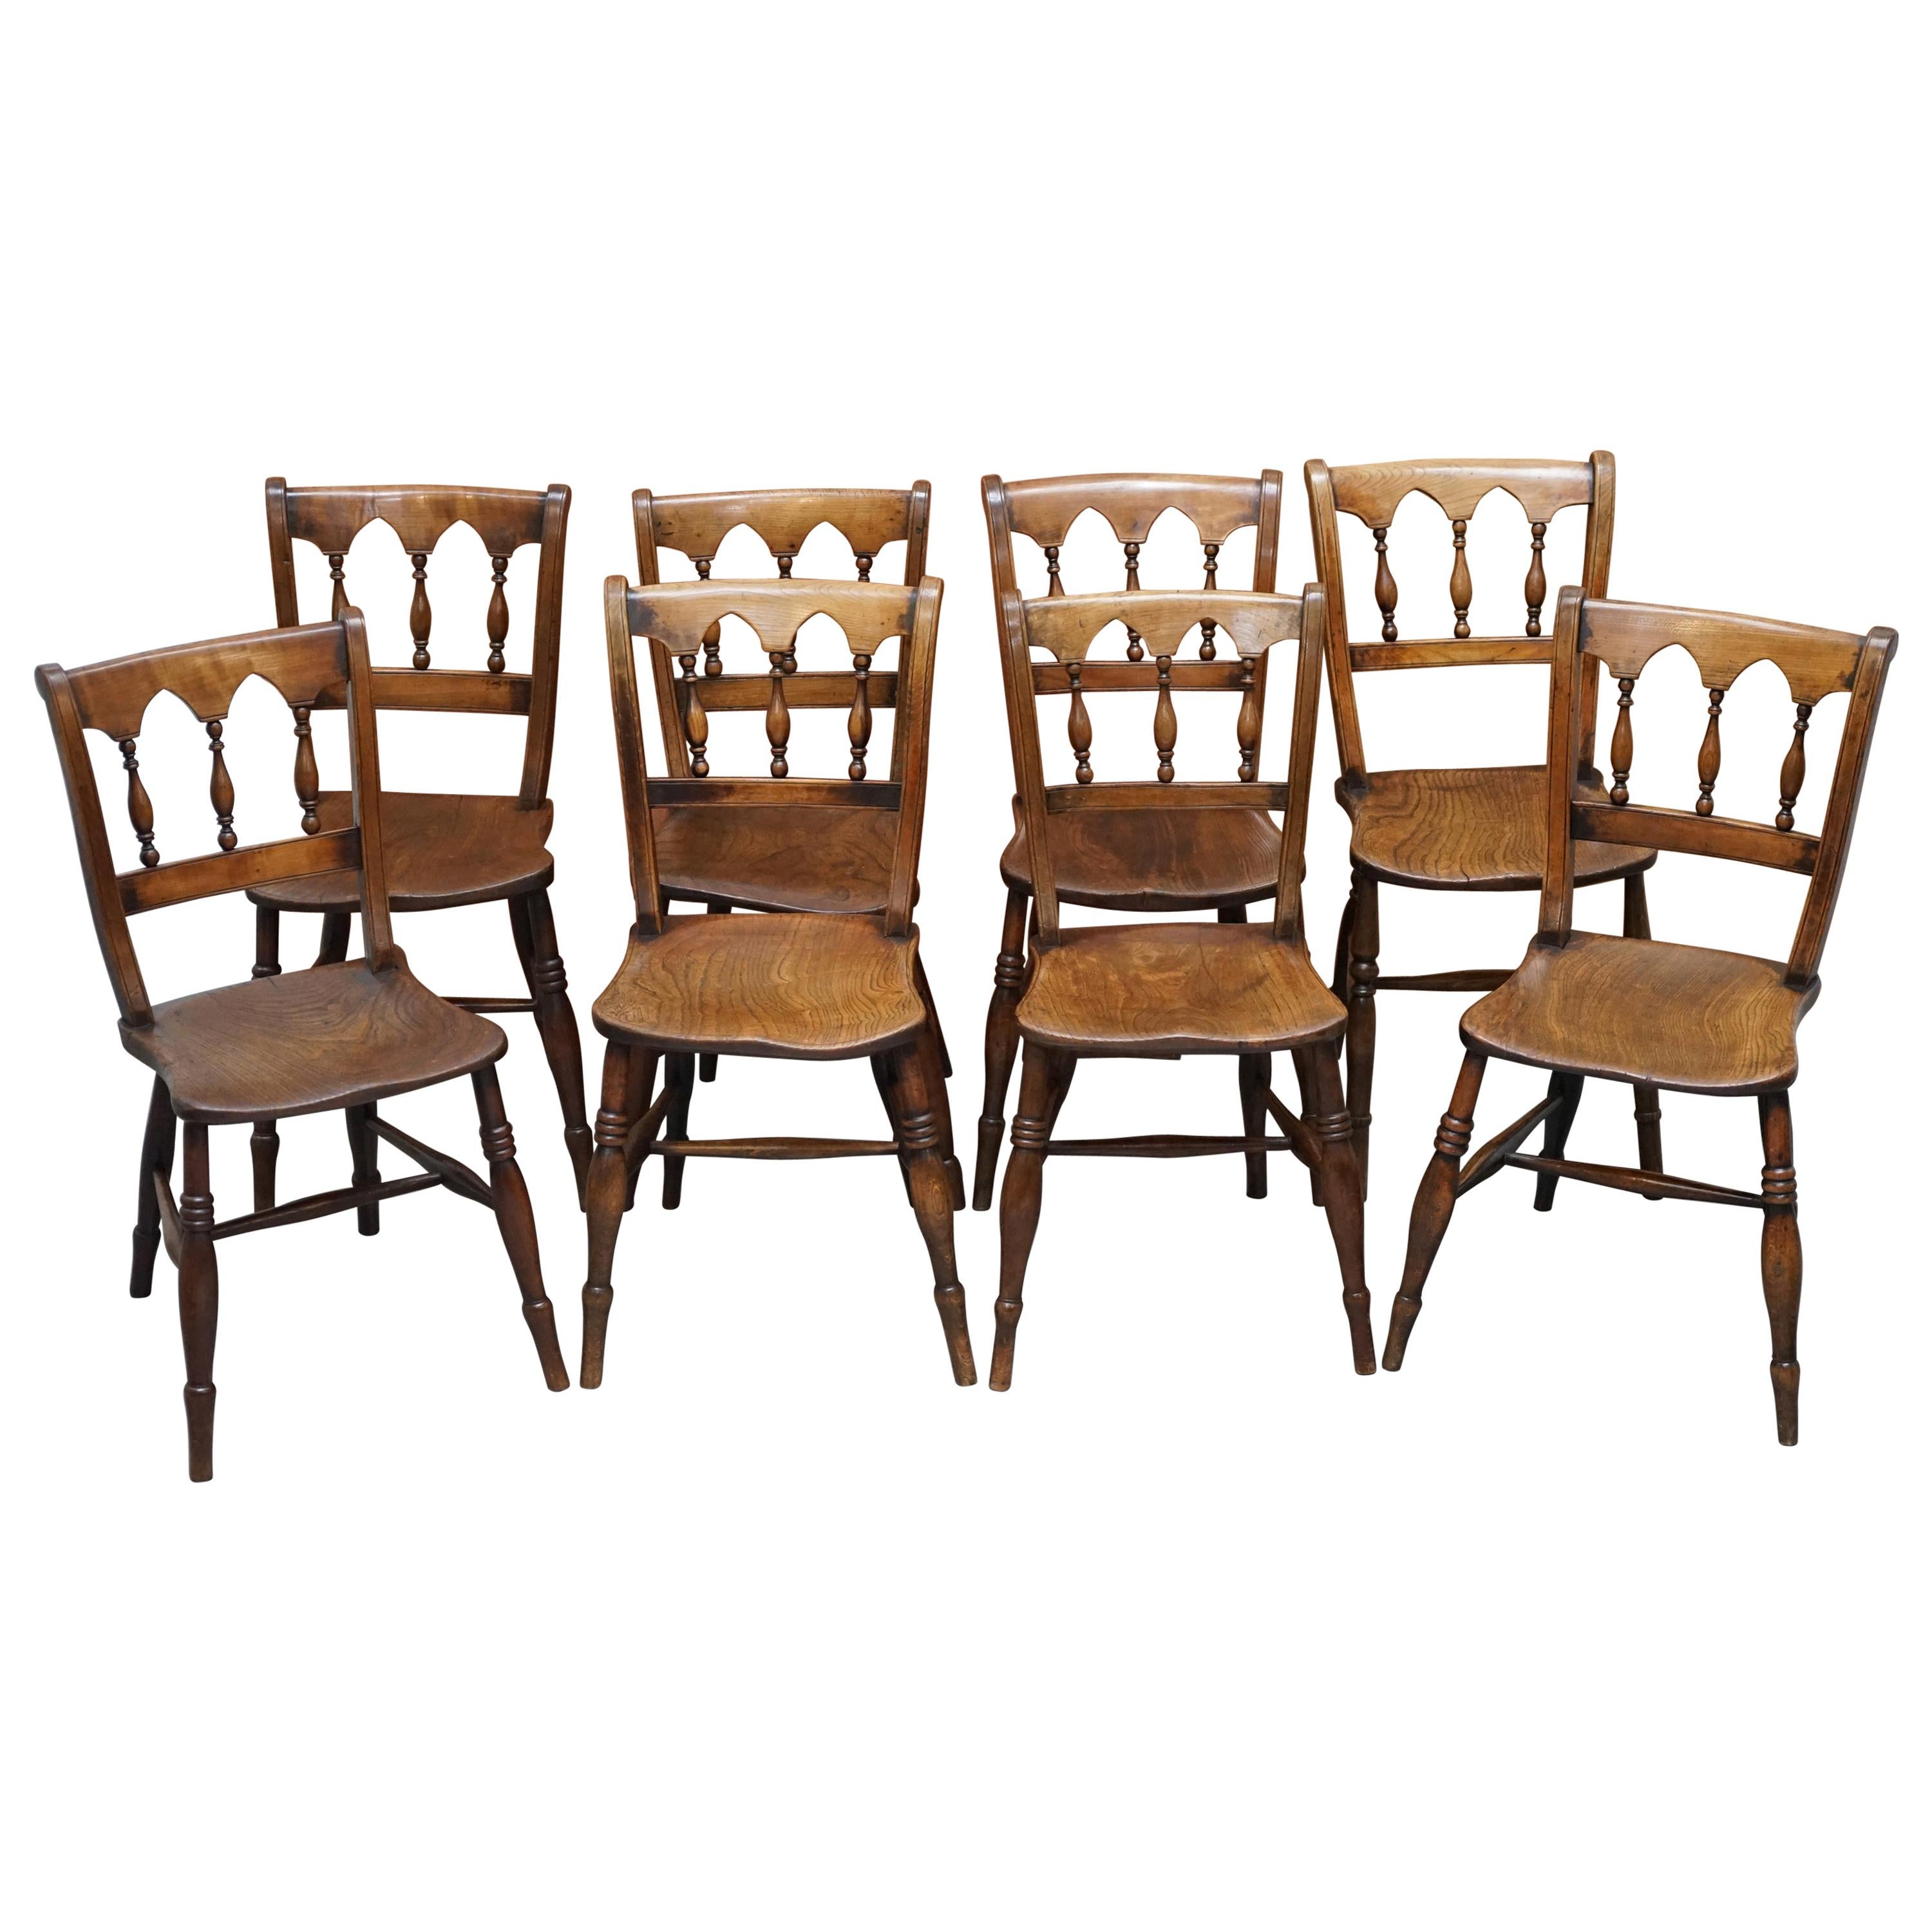 Sublime Suite of Eight circa 1840 English Windsor Thames Valley Dining Chairs 8